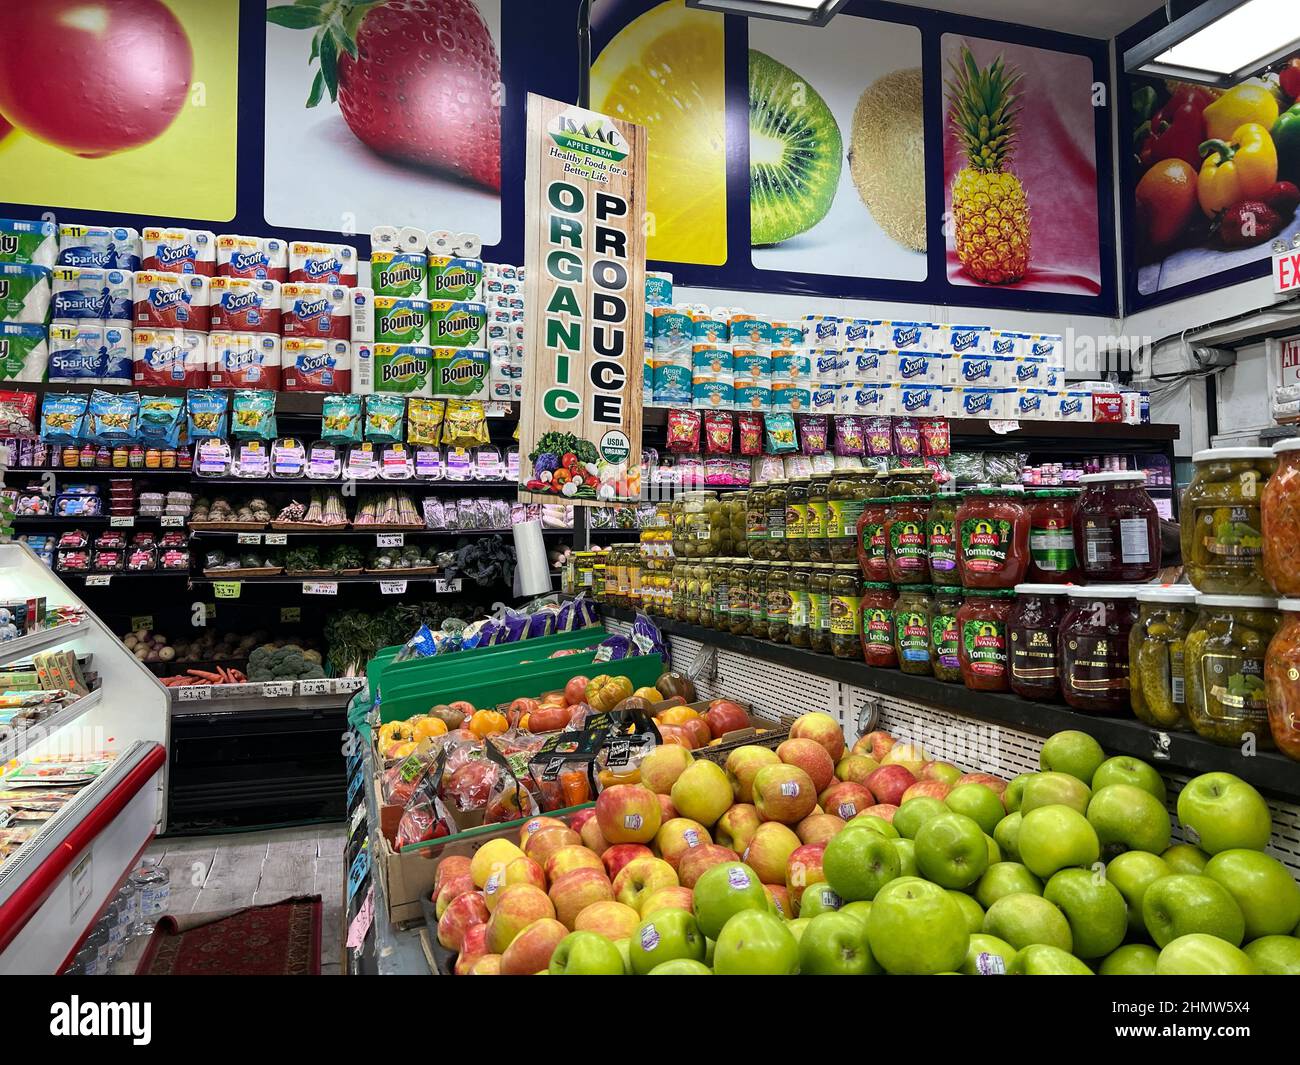 More and more grocery stores and markets are carrying organic foods as moore and more shoppers have health concerns about the quaslity of food production. Stock Photo